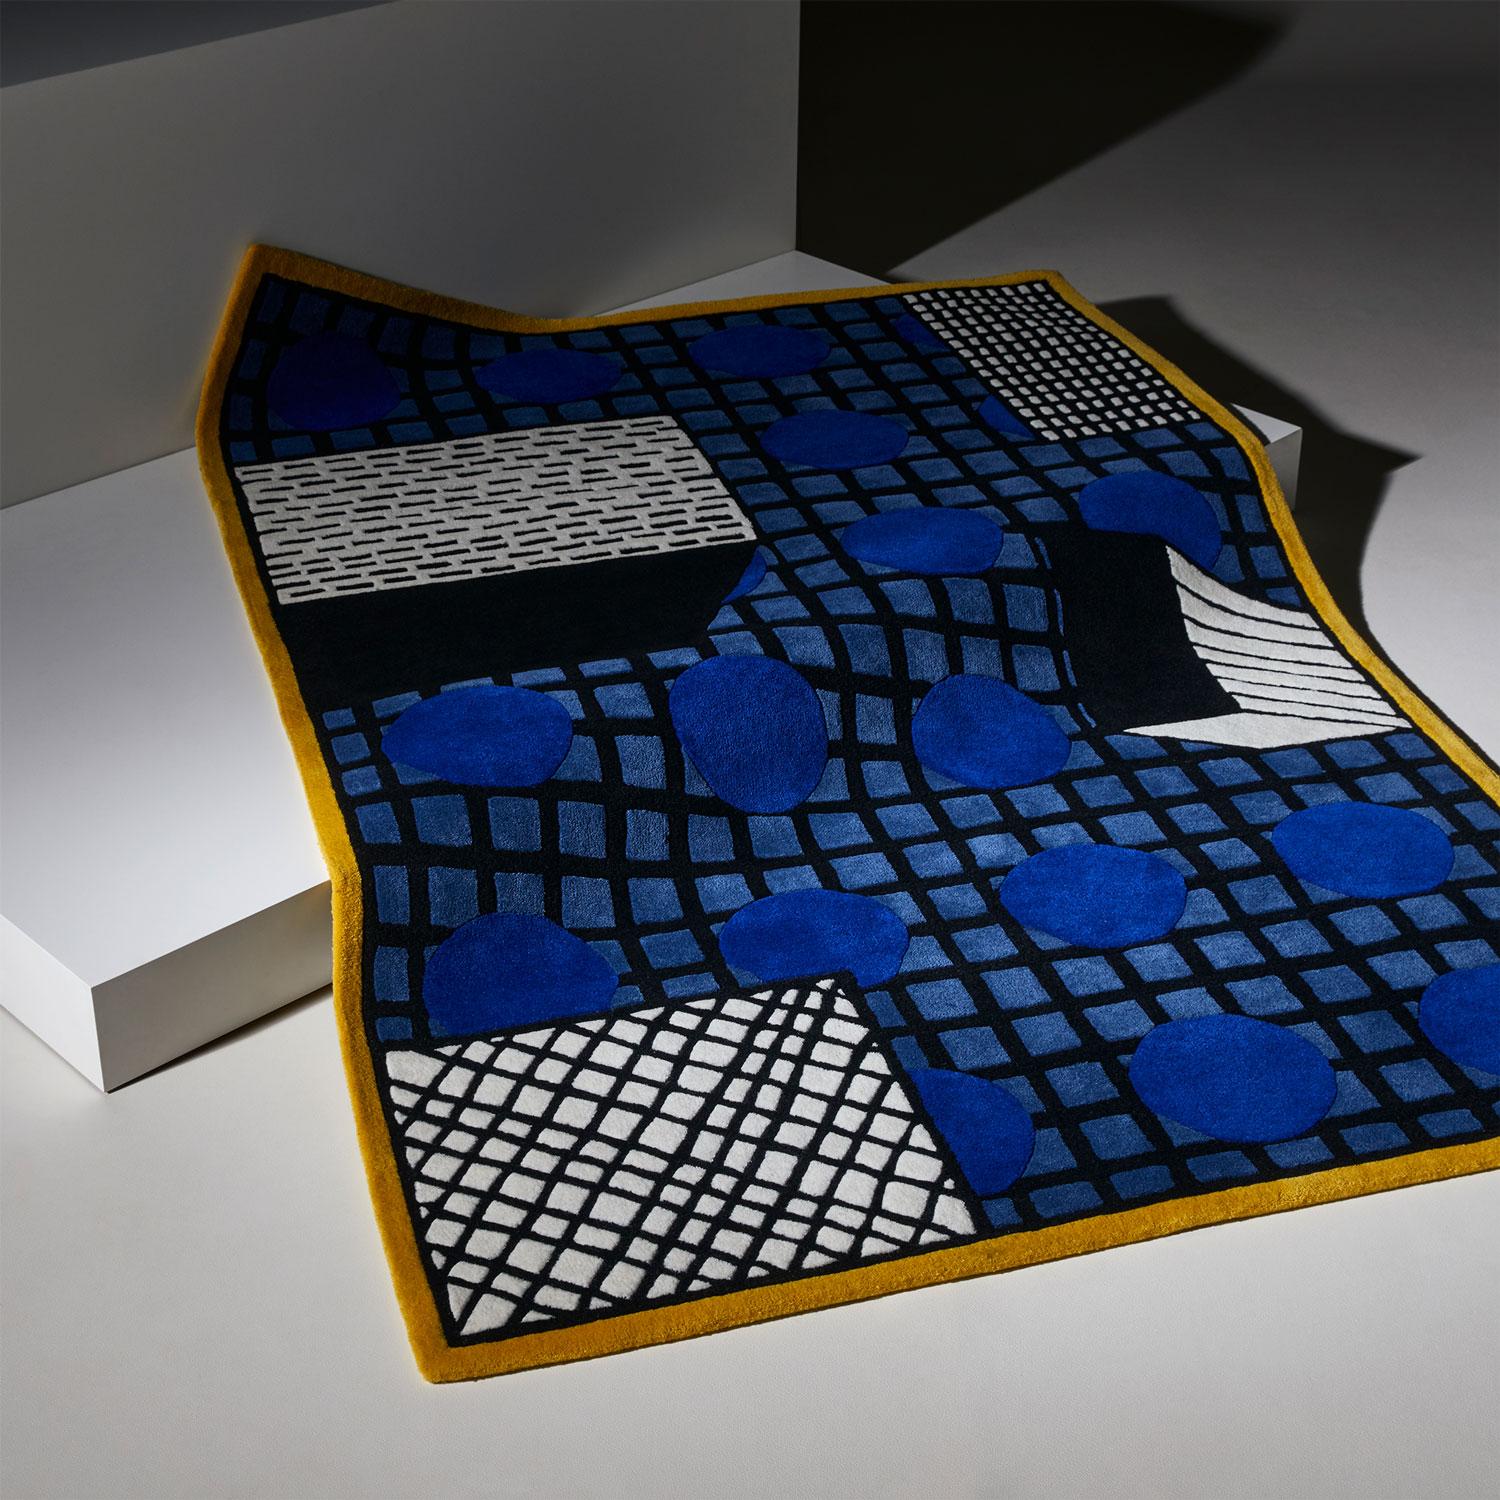 Tapigri rug by Nathalie Du Pasquier
Dimensions: 170 x 240 cm
Made to order creations can be done: 

Tapigri is a construction of layered geometric patterns topped by 3 elements that give the rug an almost architectural presence.

 
Each rug